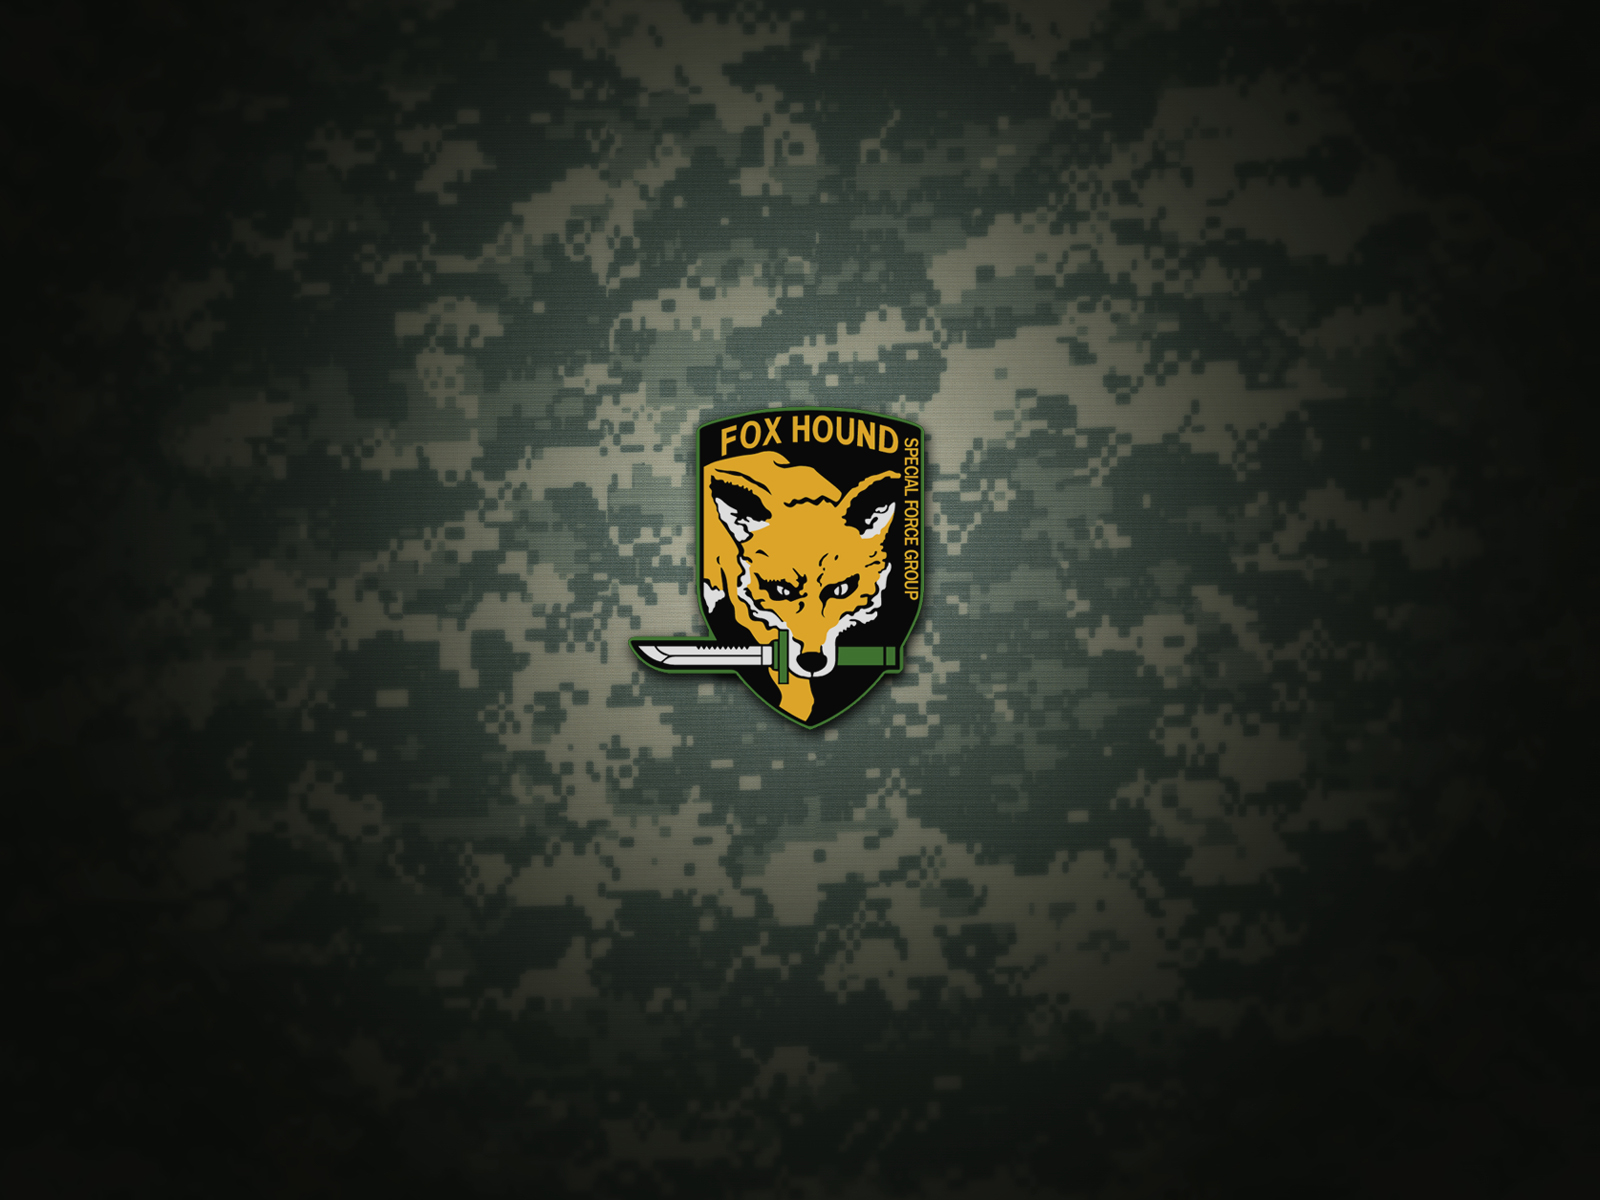 metal gear, army, metal gear solid, foxhound (metal gear), military, video game